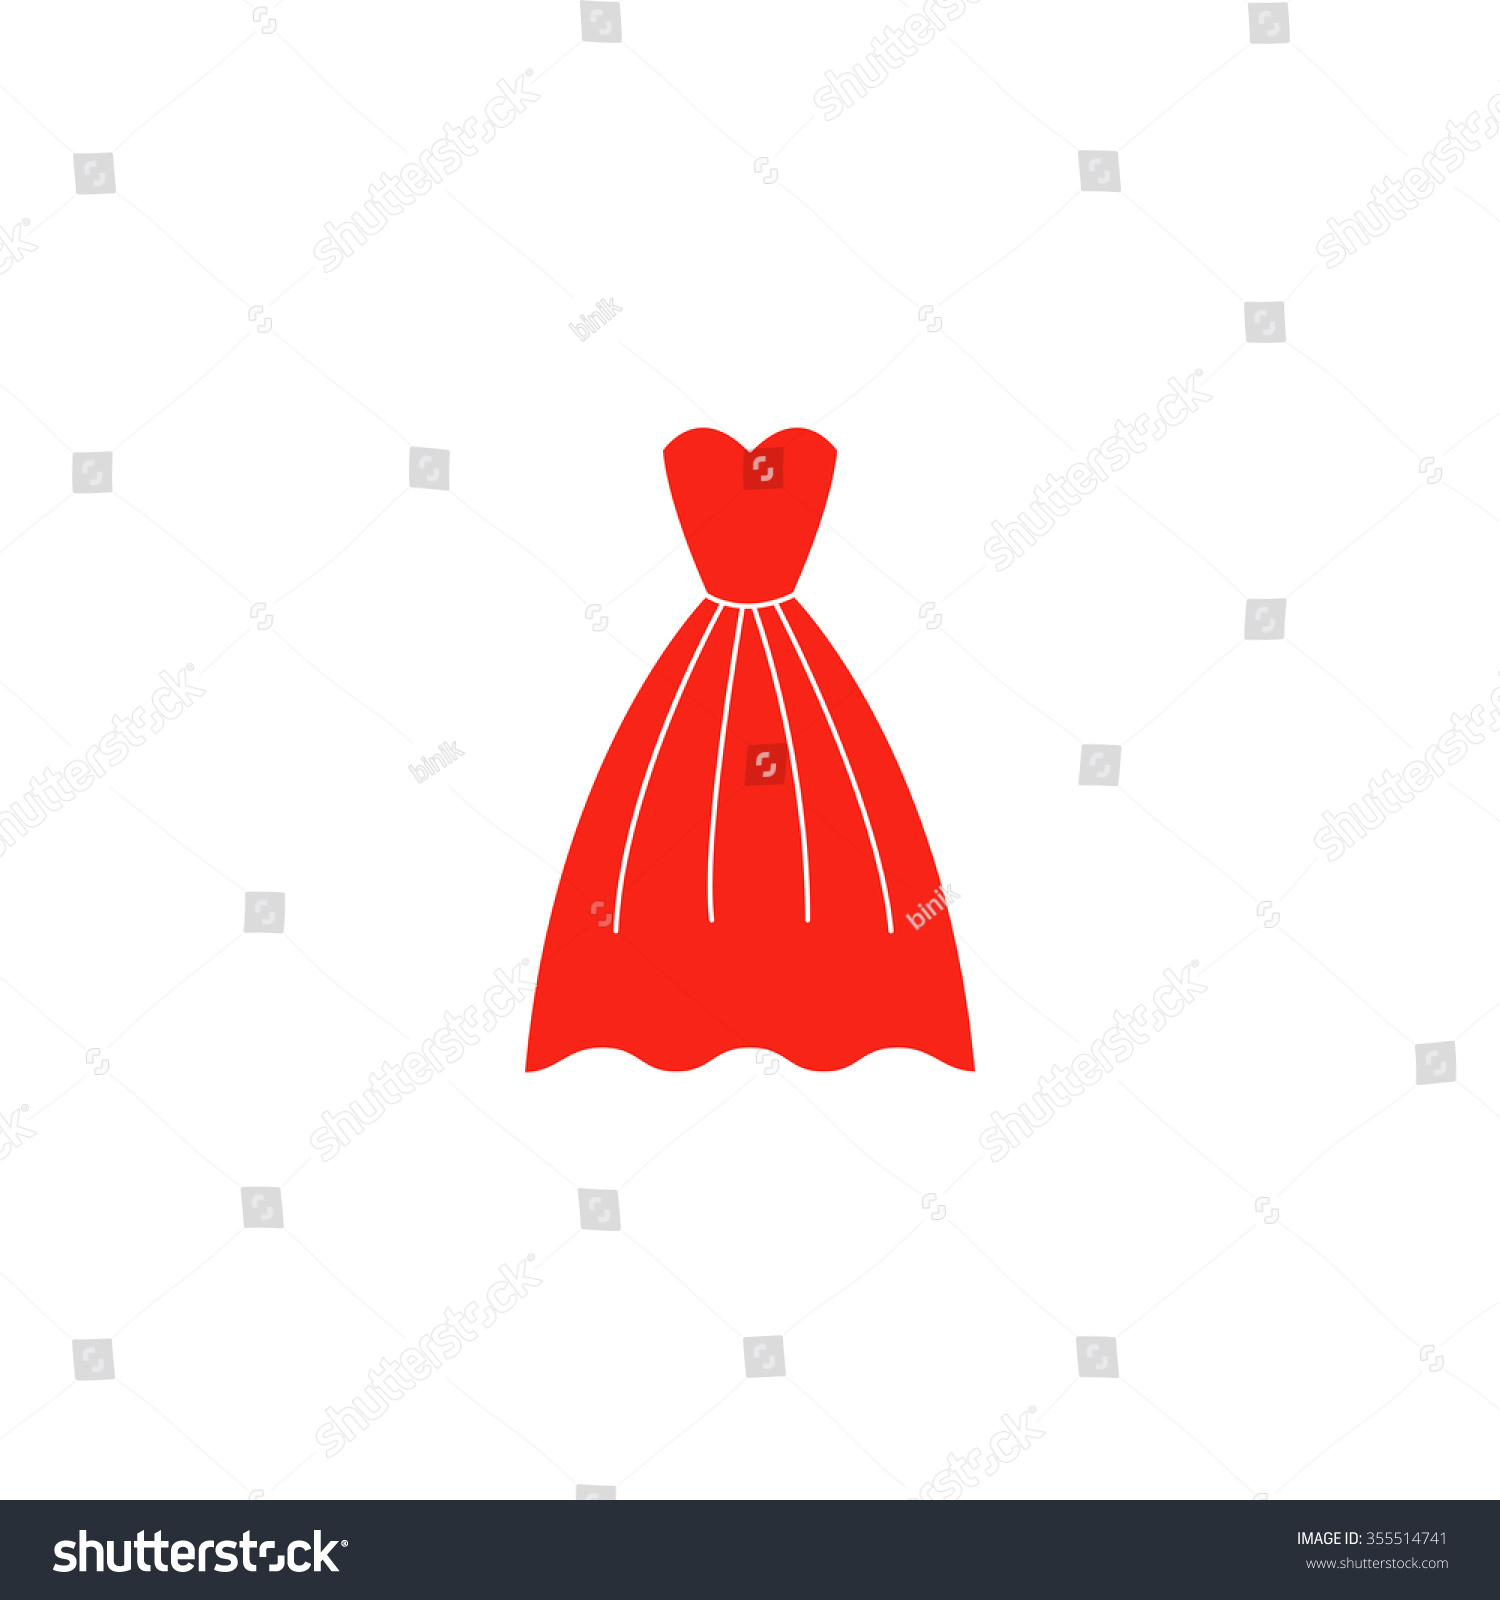 red dress clipart - photo #26